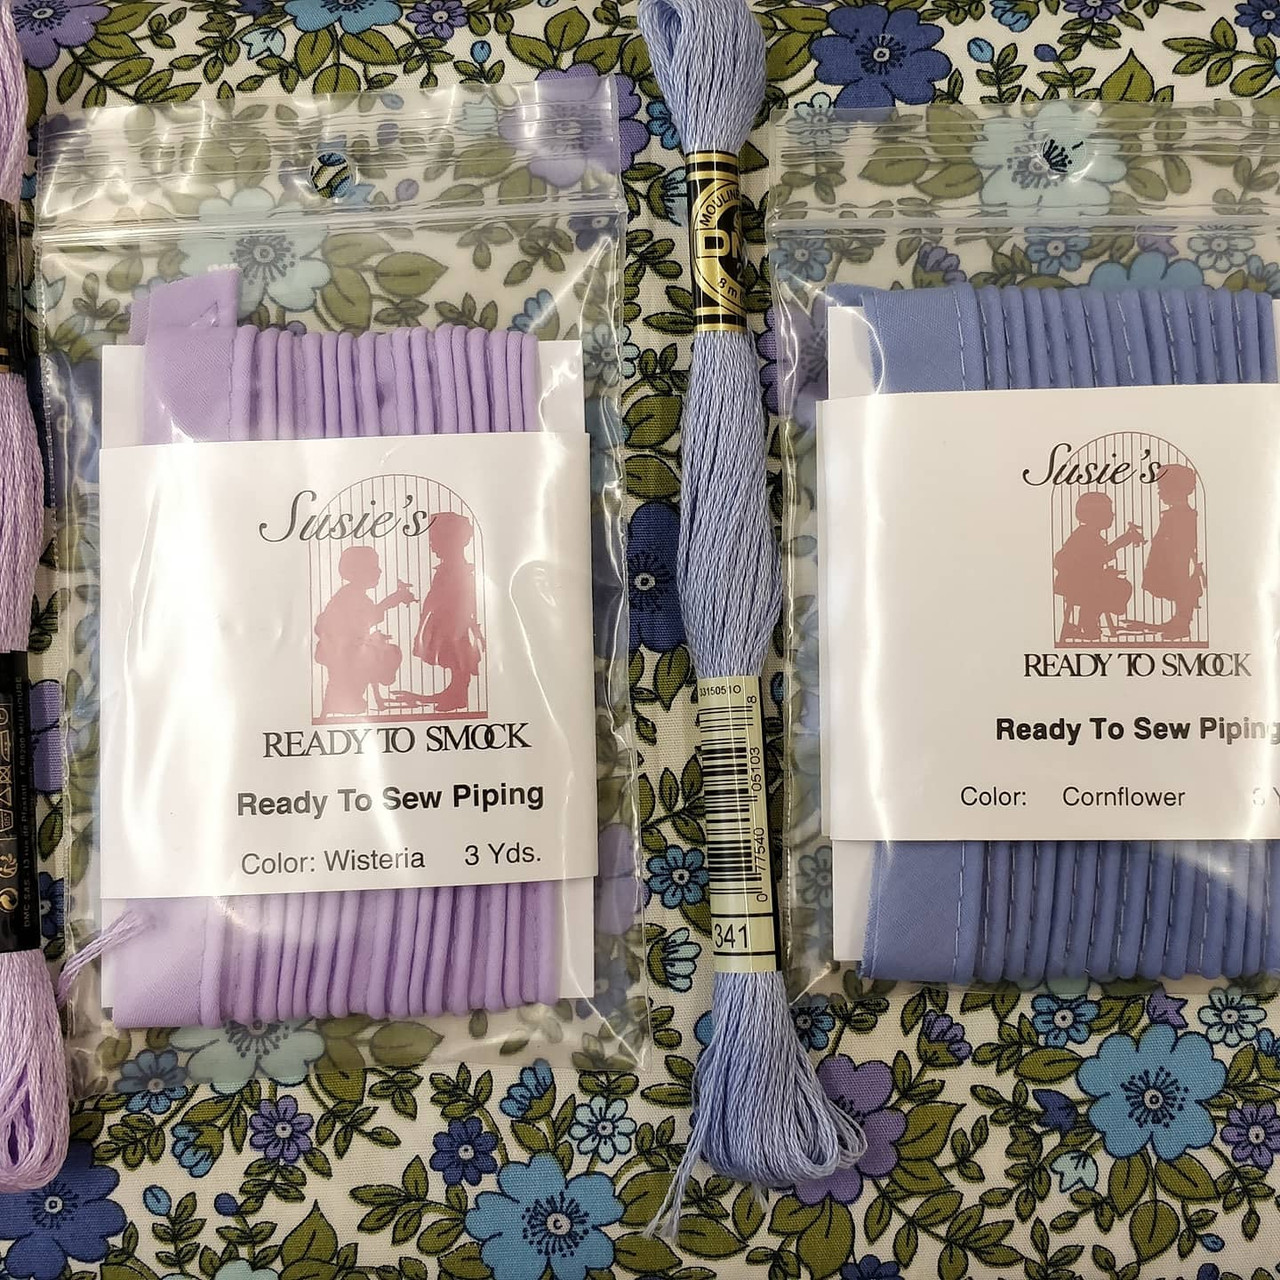 Rose & Hubble floral blues and purple shades fabric with matching piping and threads